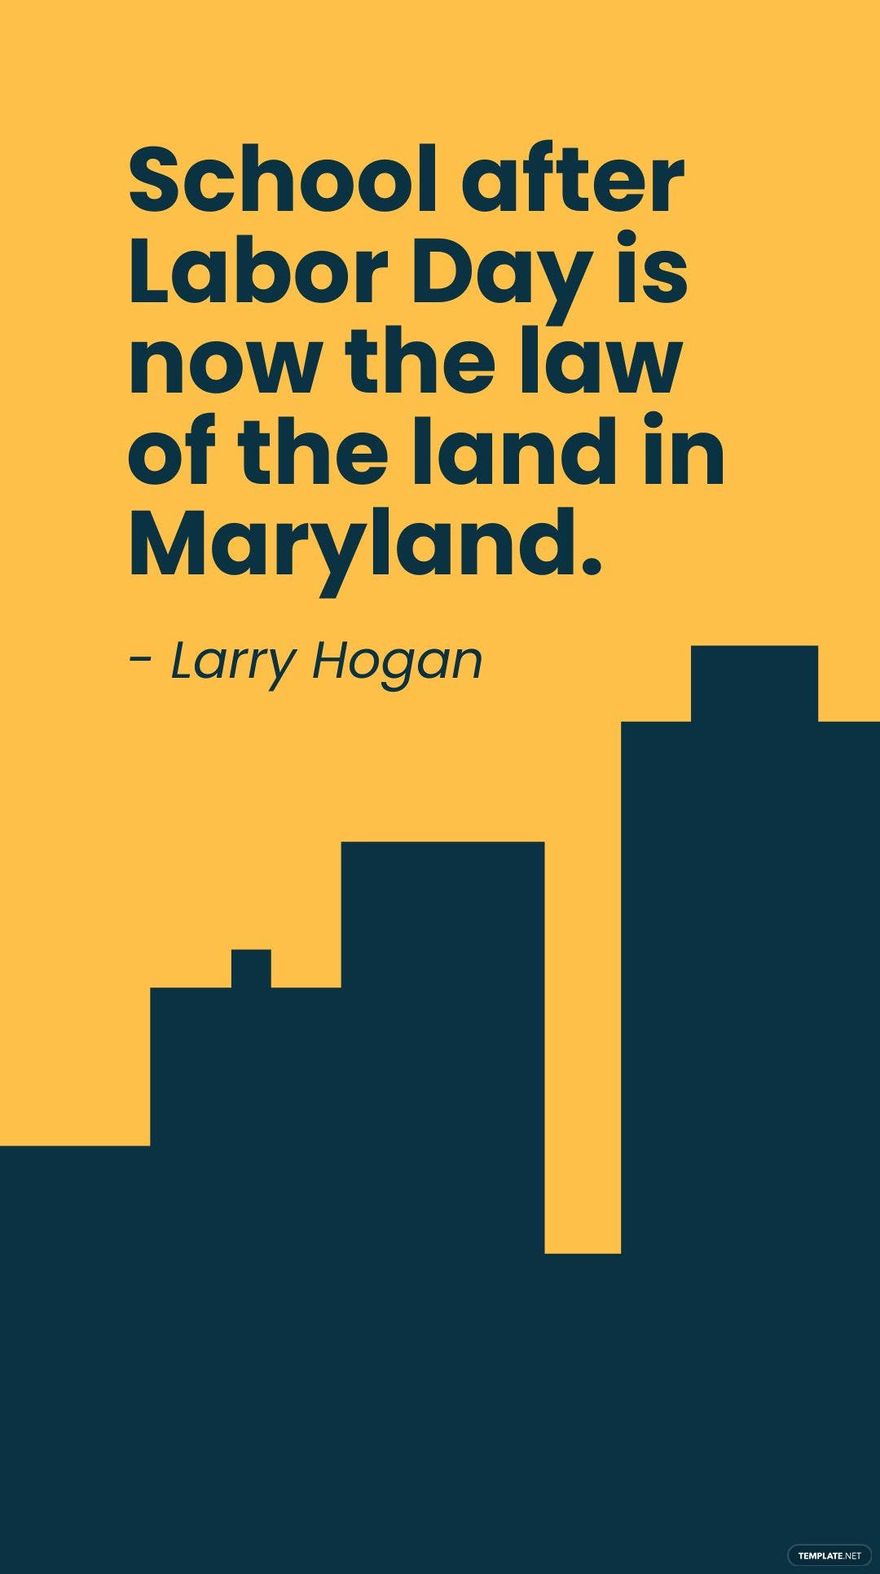 Free Larry Hogan - School after Labor Day is now the law of the land in Maryland. in JPG